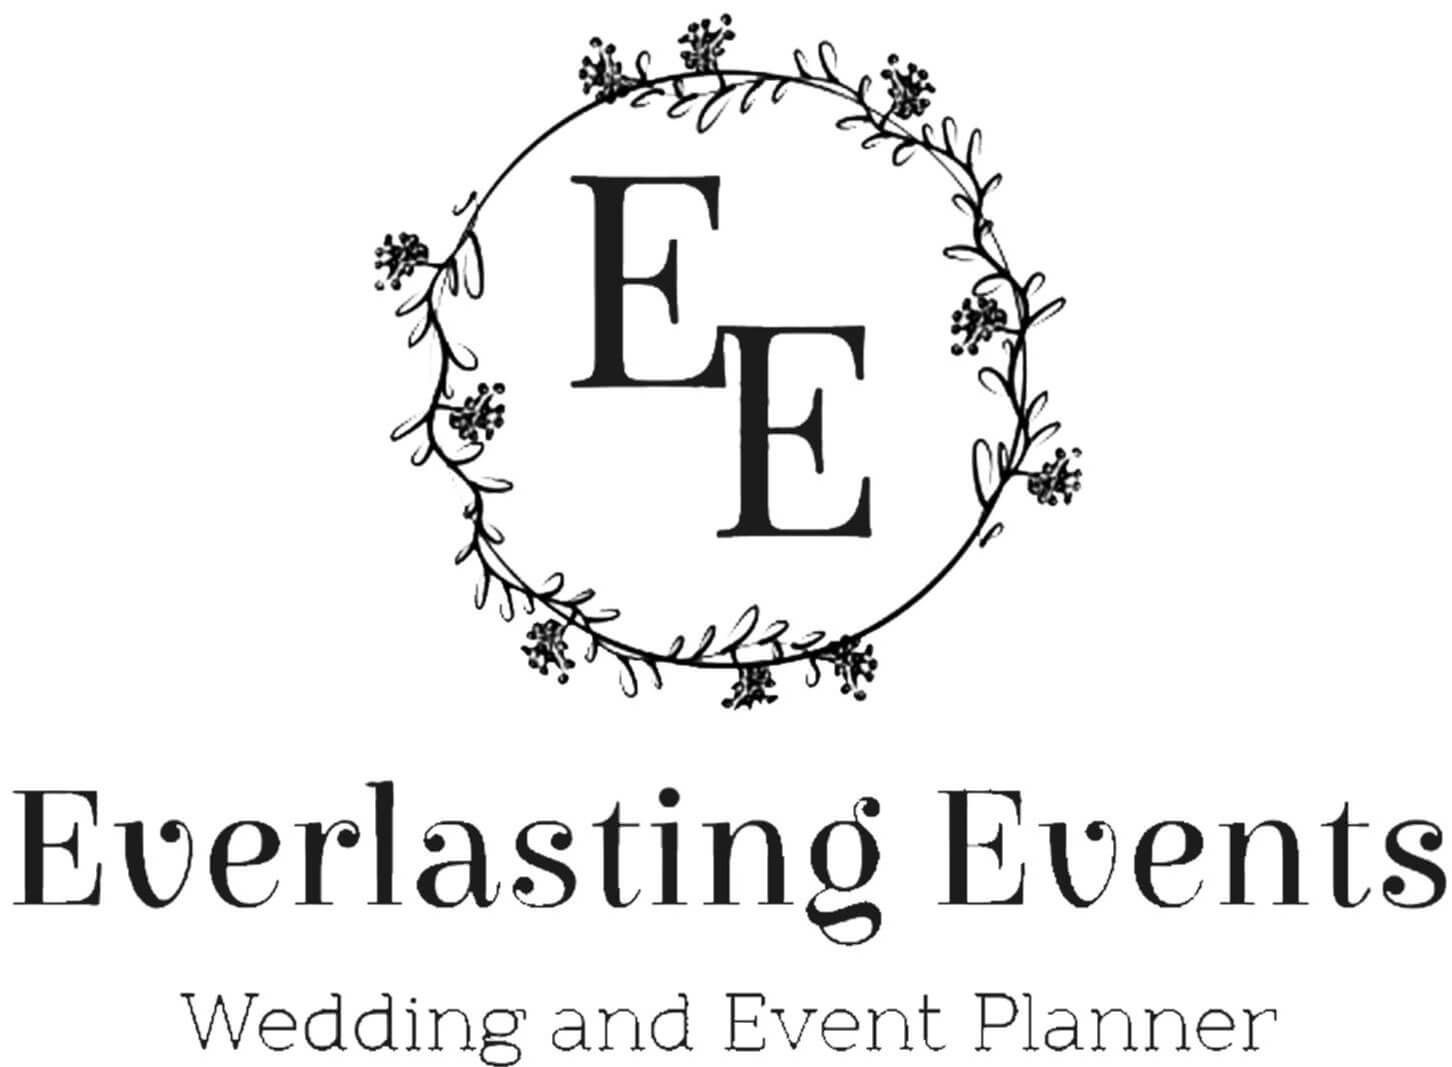 everlasting events by heather